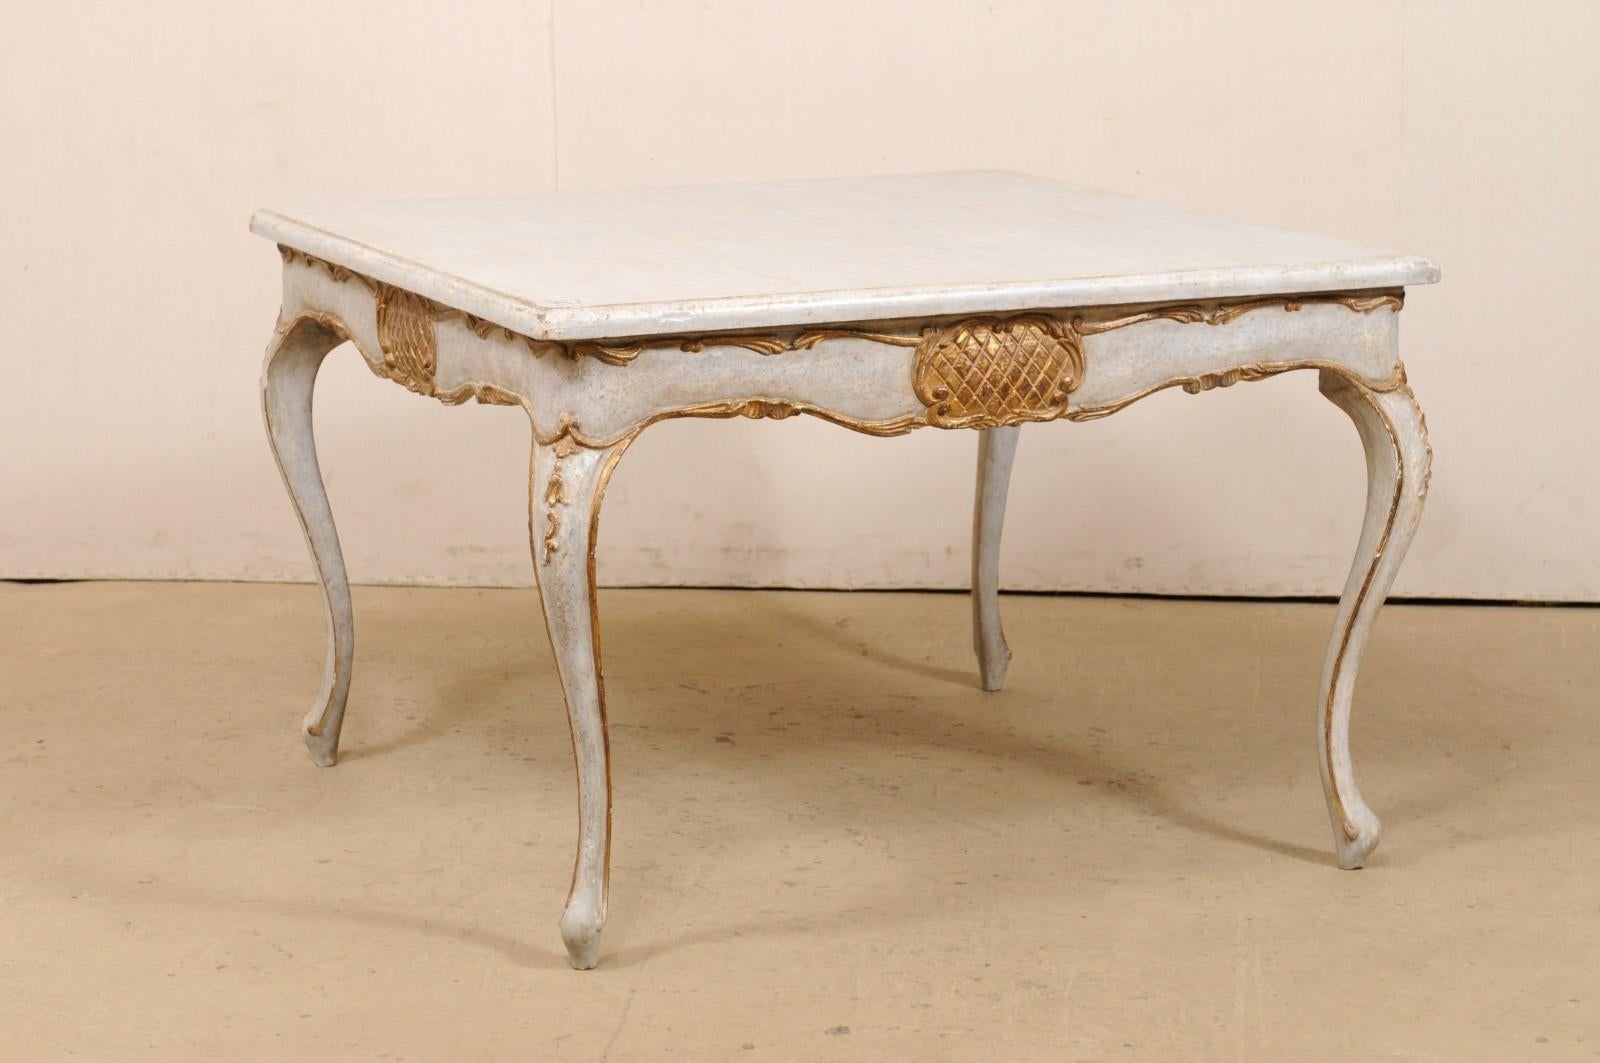 A vintage Italian square-shaped carved-wood table with gilt accents. This painted wood table from Italy features a square-shaped top with softly, rounded corners, a scalloped skirt which is adorn with carvings highlighted in a gilt finish, and is